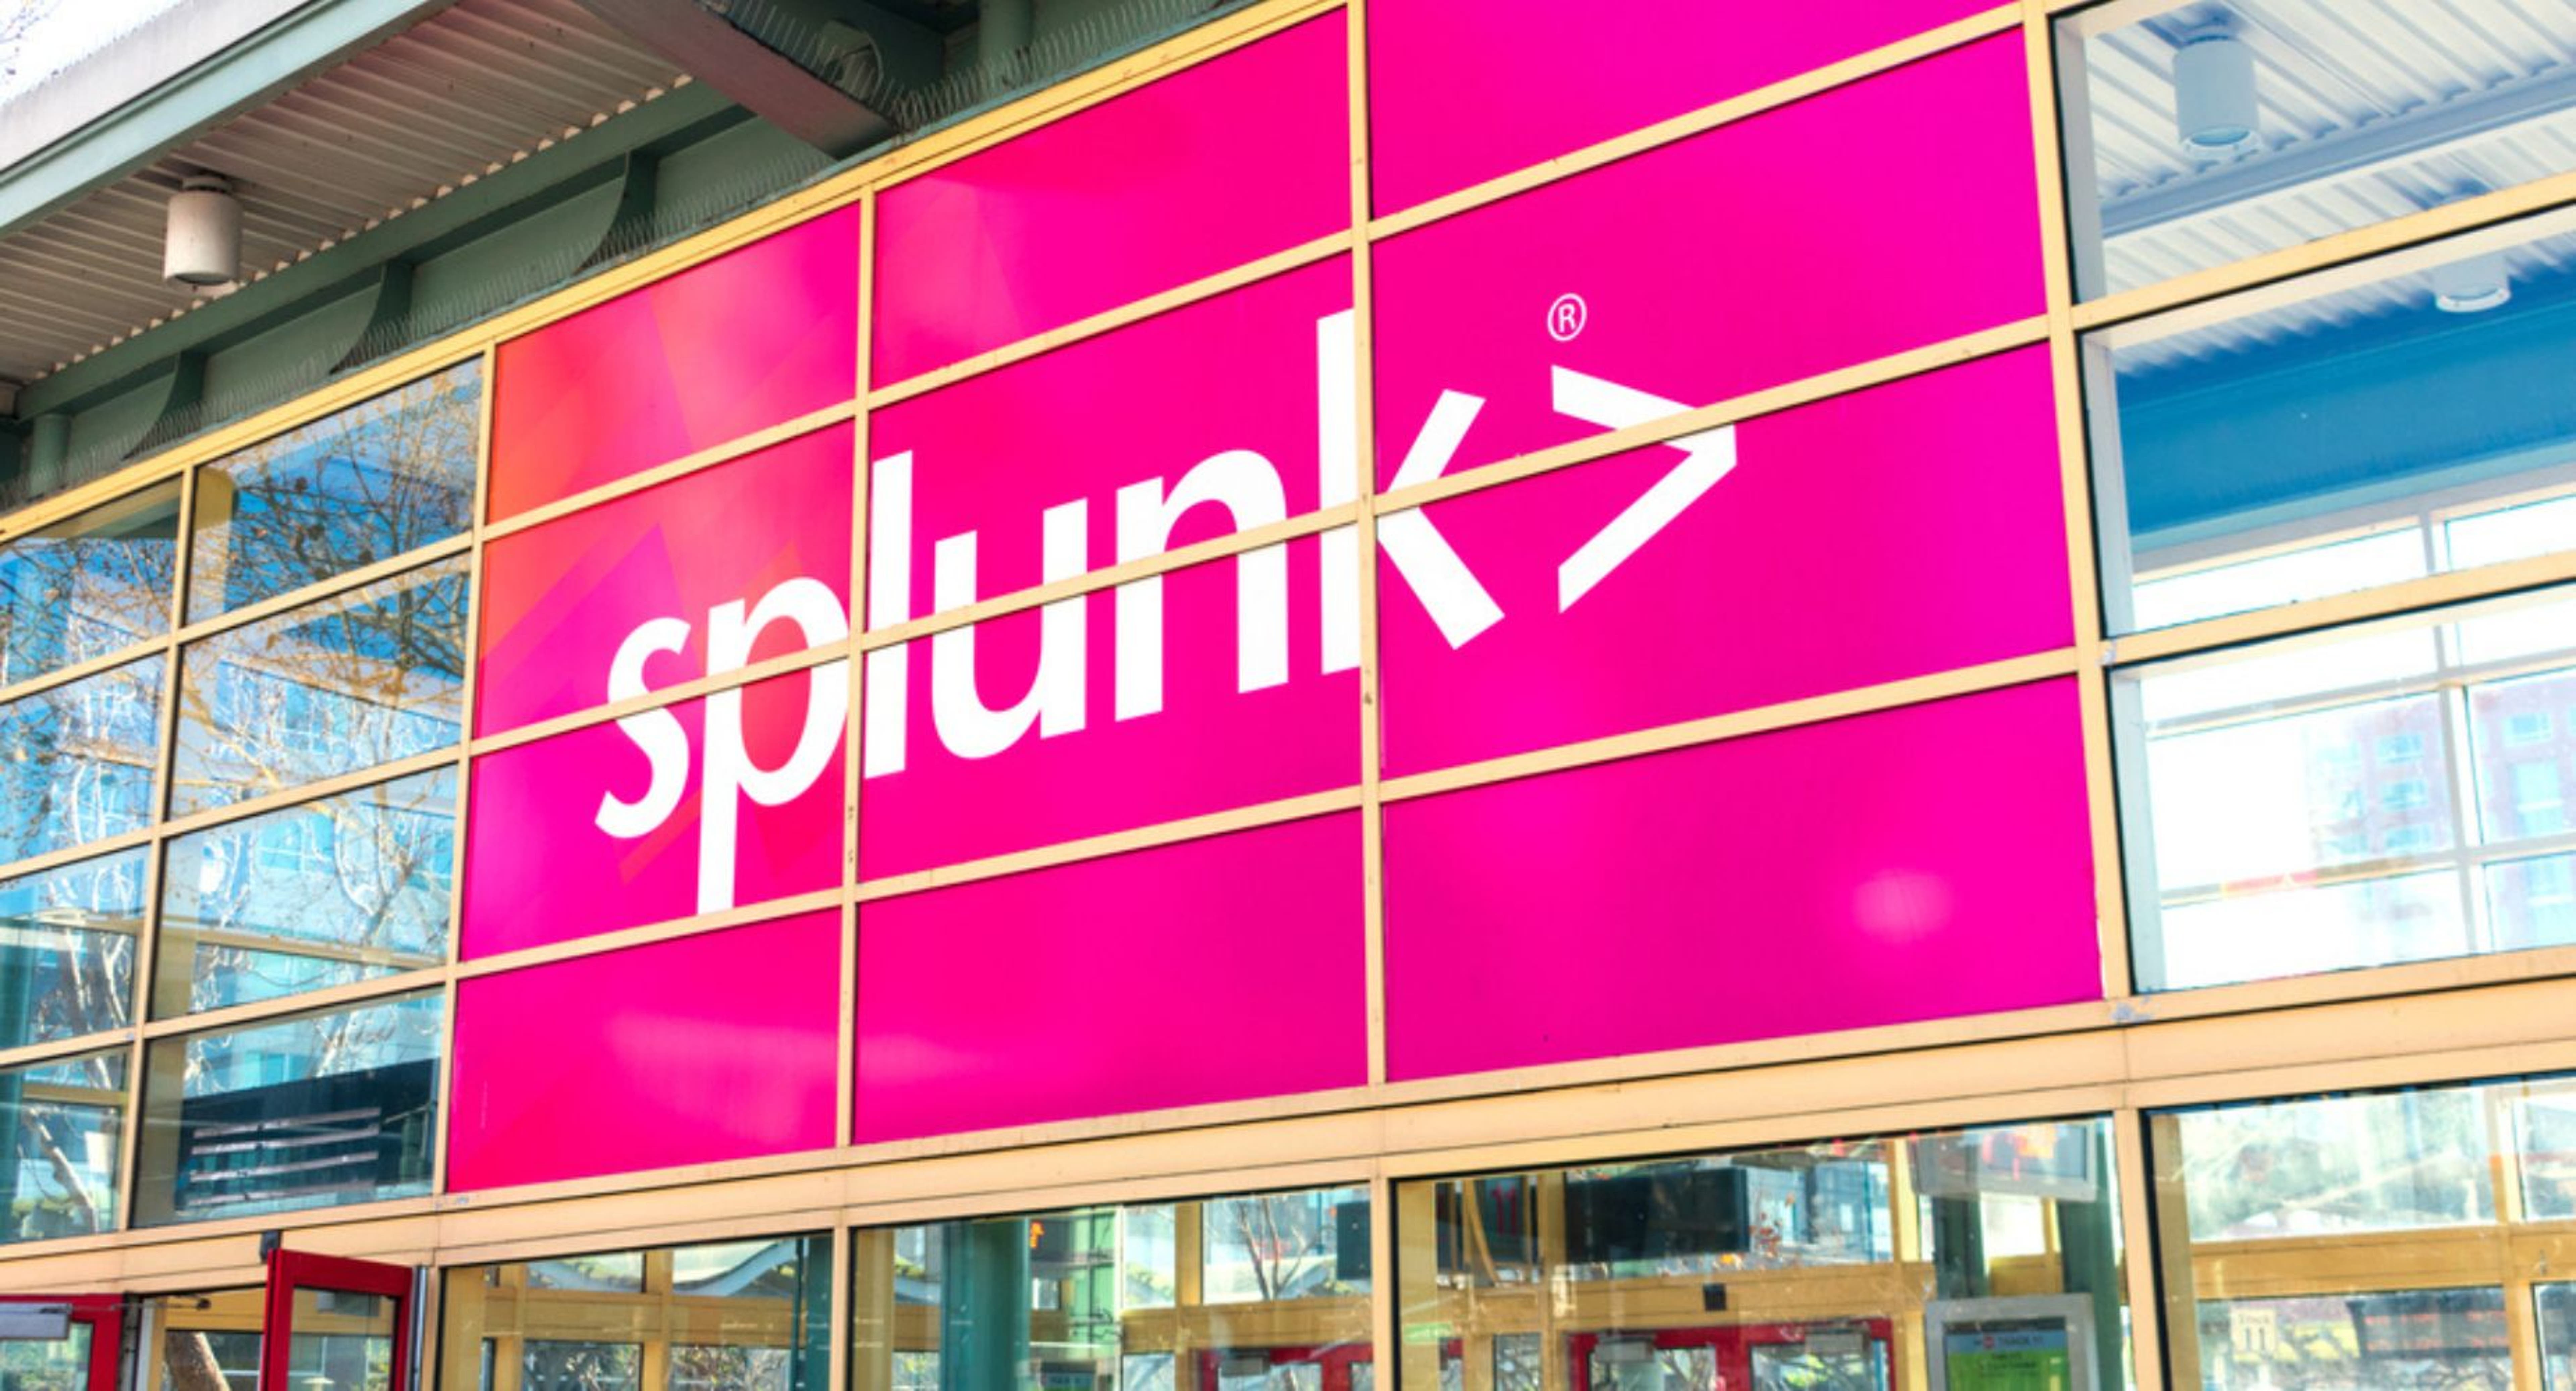 Is Splunk A Good Investment After Cisco Deal Announcement? 7 Analysts Weigh In